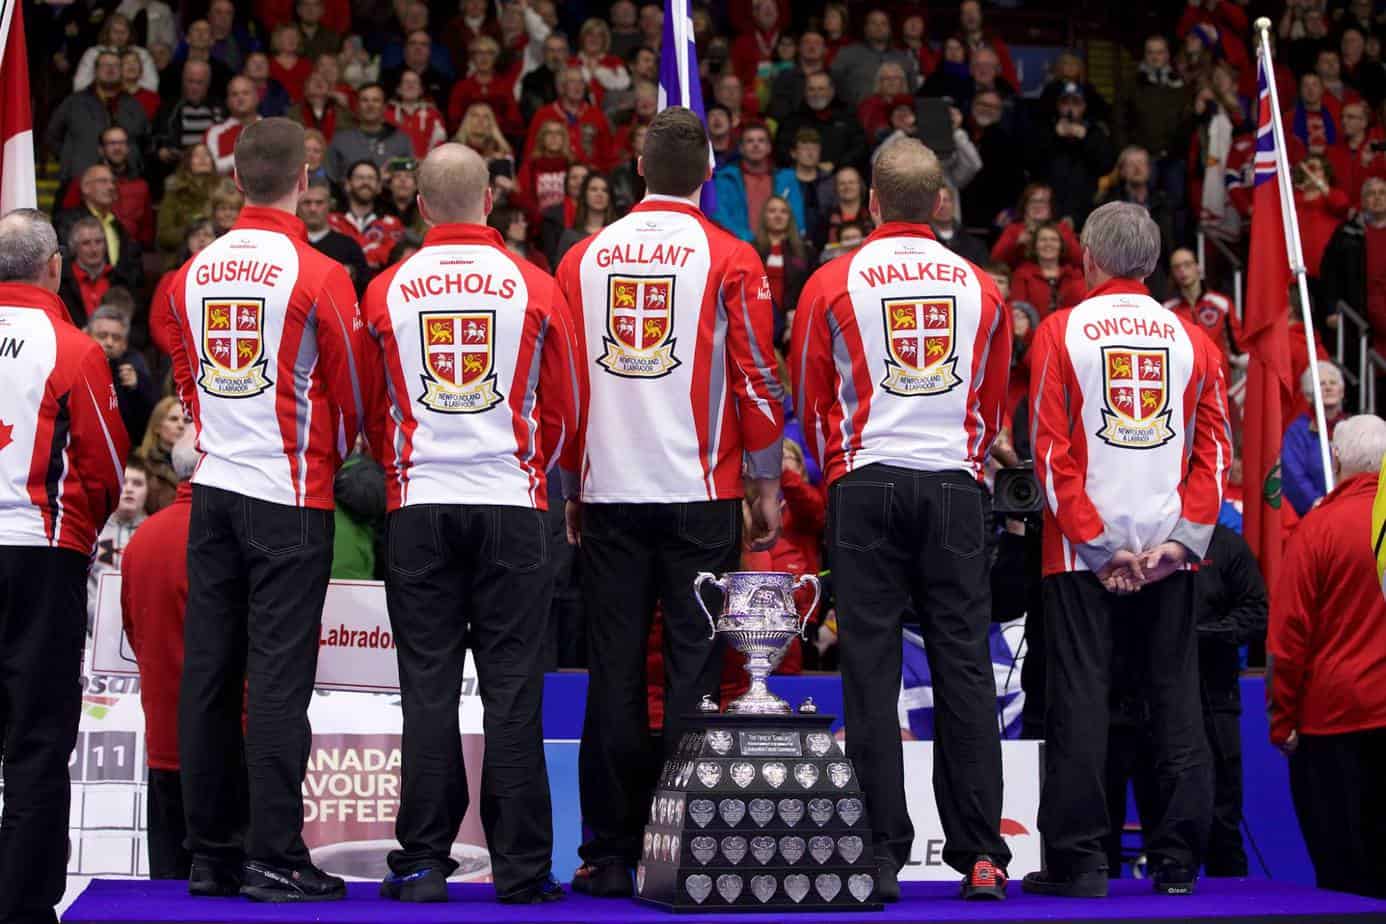 gushue with his team